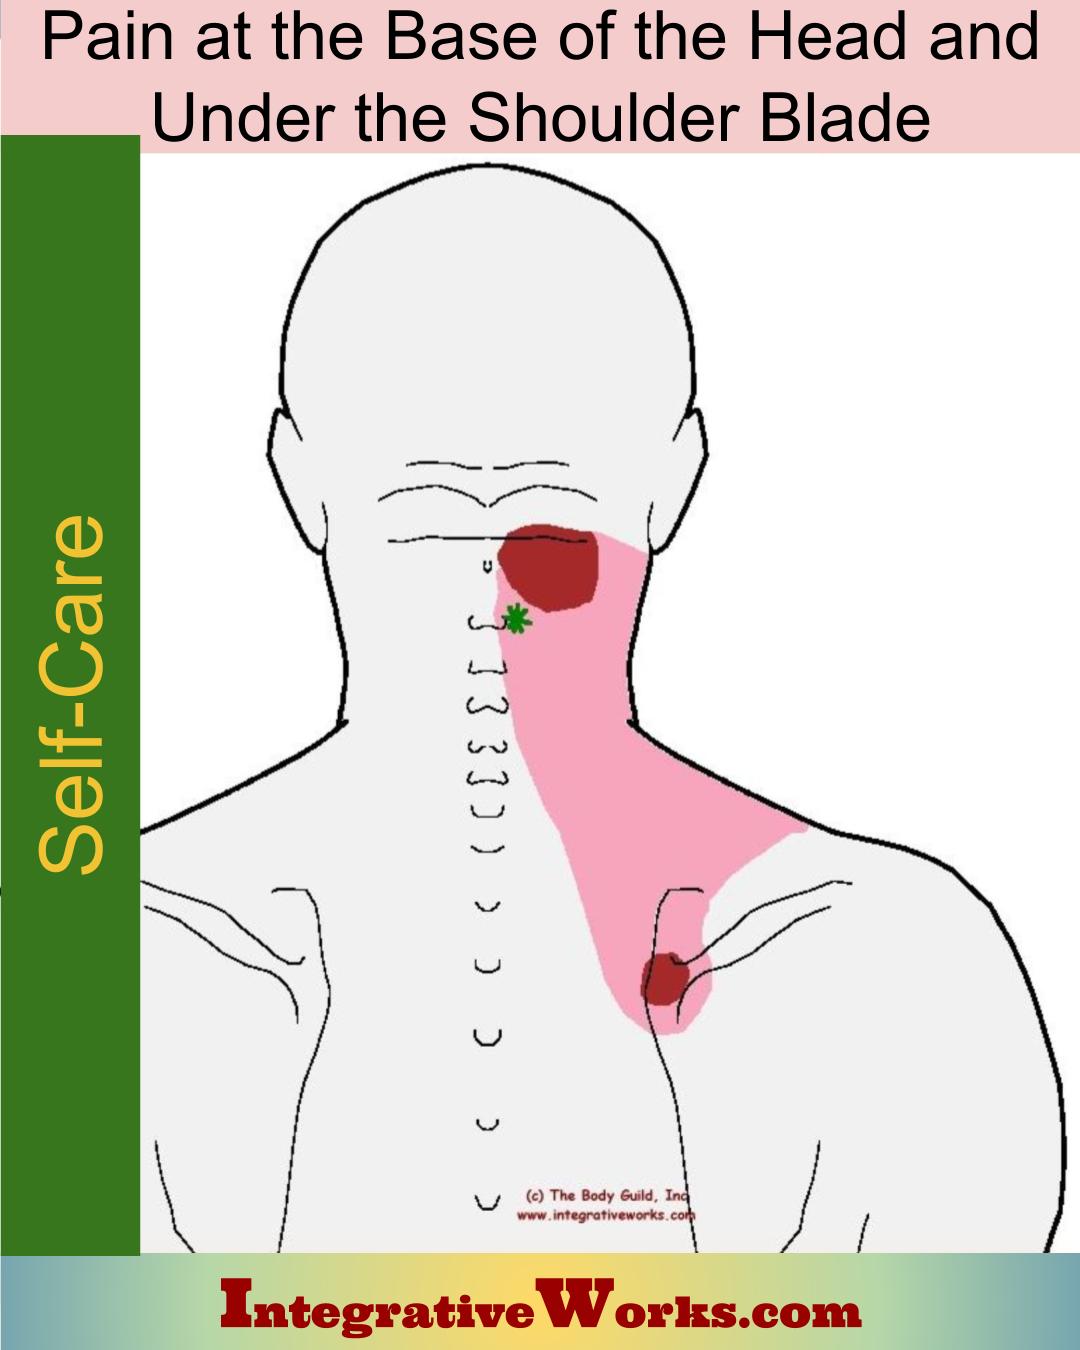 Self Care – Pain at the Base of the Head and Under Shoulder Blade